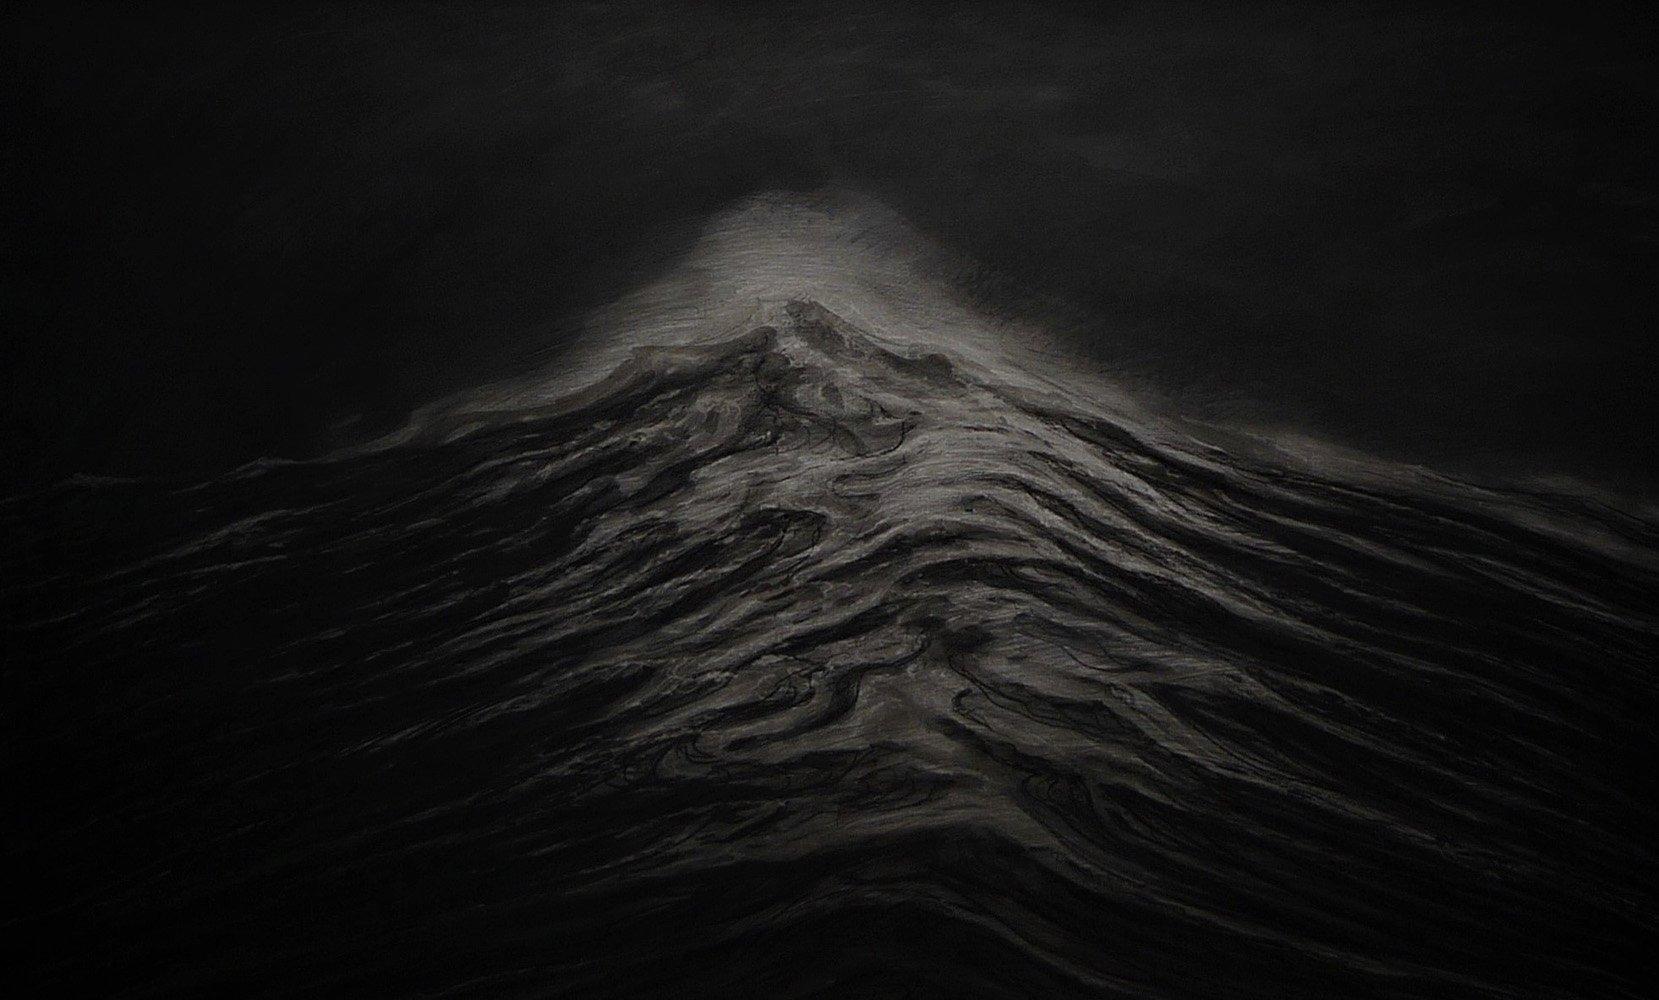 Pyramidal Wave is a unique graphite on Figueras paper painting by contemporary artist Franco Salas Borquez, dimensions are 65 × 100 cm (25.6 × 39.4 in). Dimensions of the framed artwork are 81 x 117 cm (31.8 x 46 in).
The artwork is signed, sold